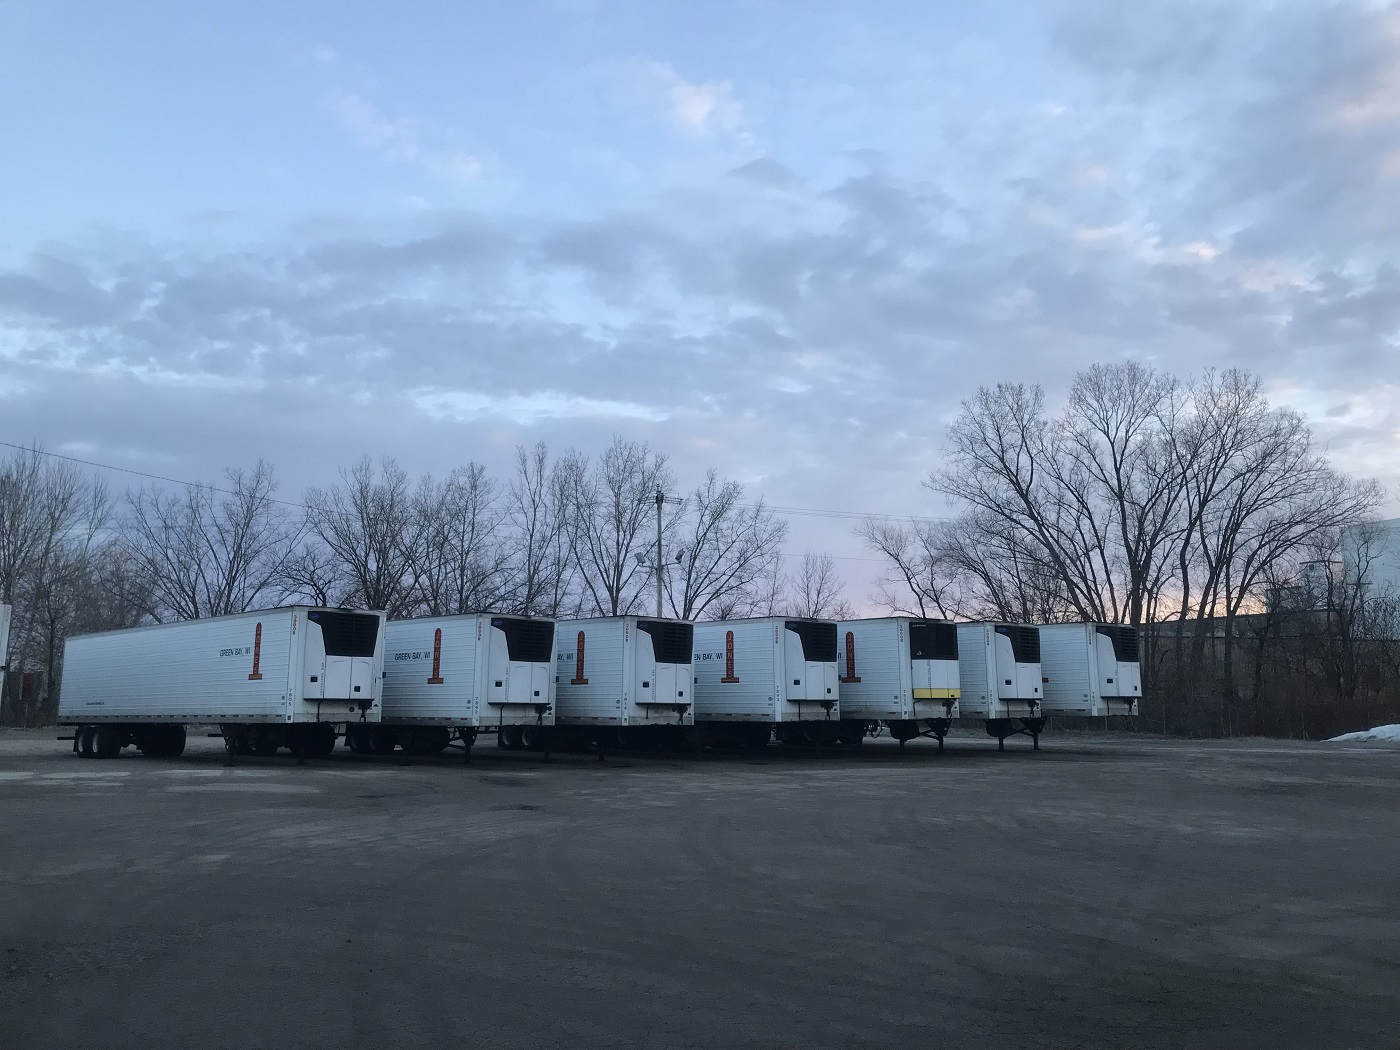 Jones Transfer's large fleet of trailers can help keep Wisconsins' businesses moving